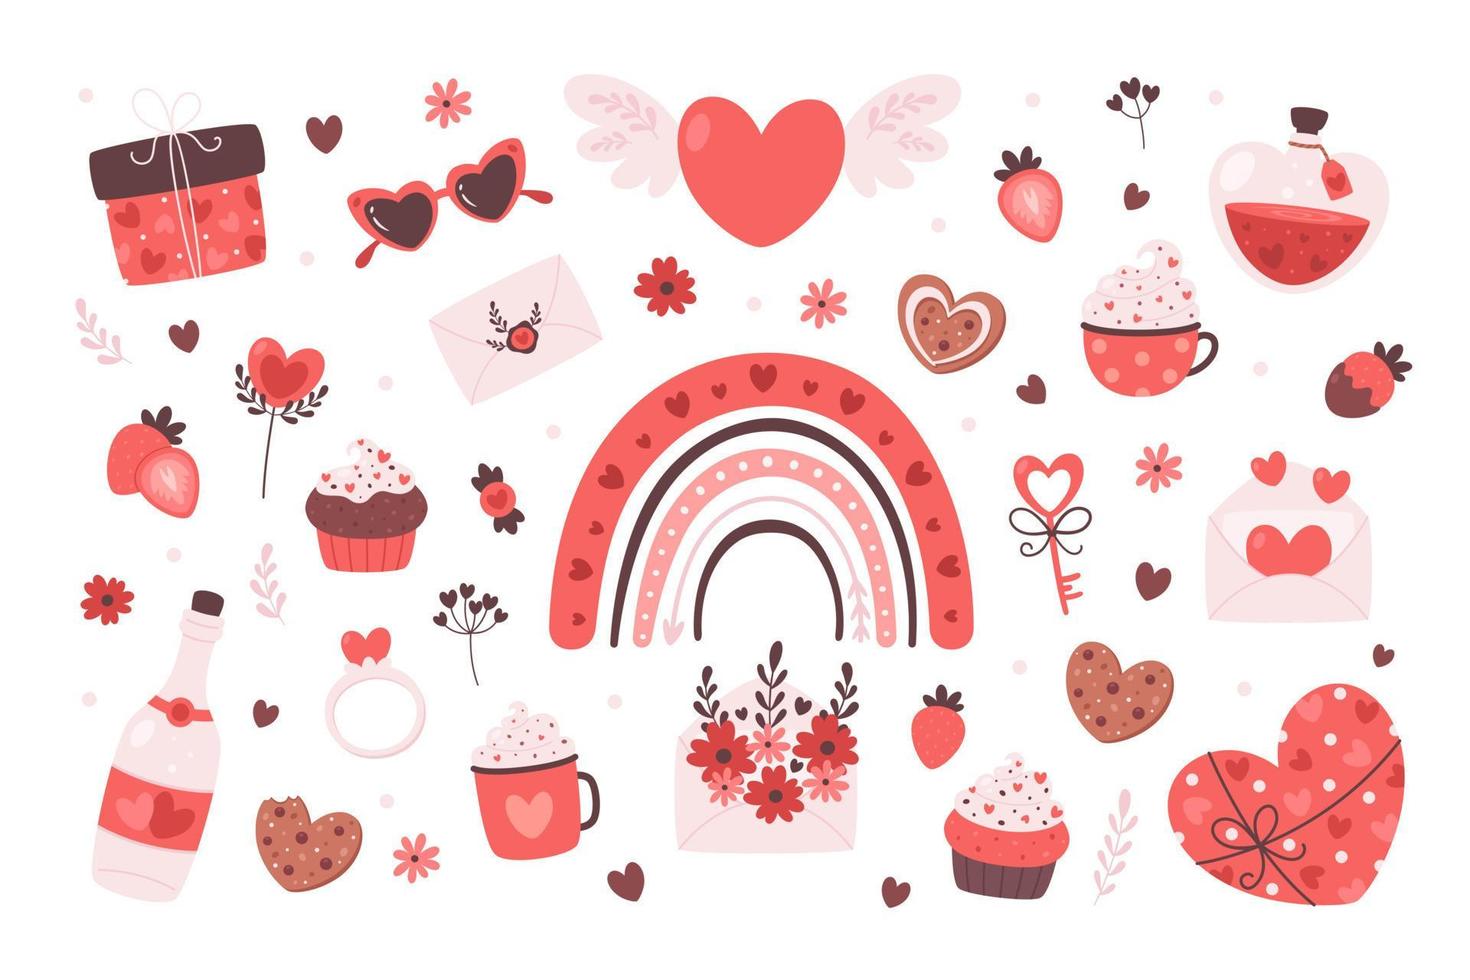 Valentines Day and romantic elements collection vector